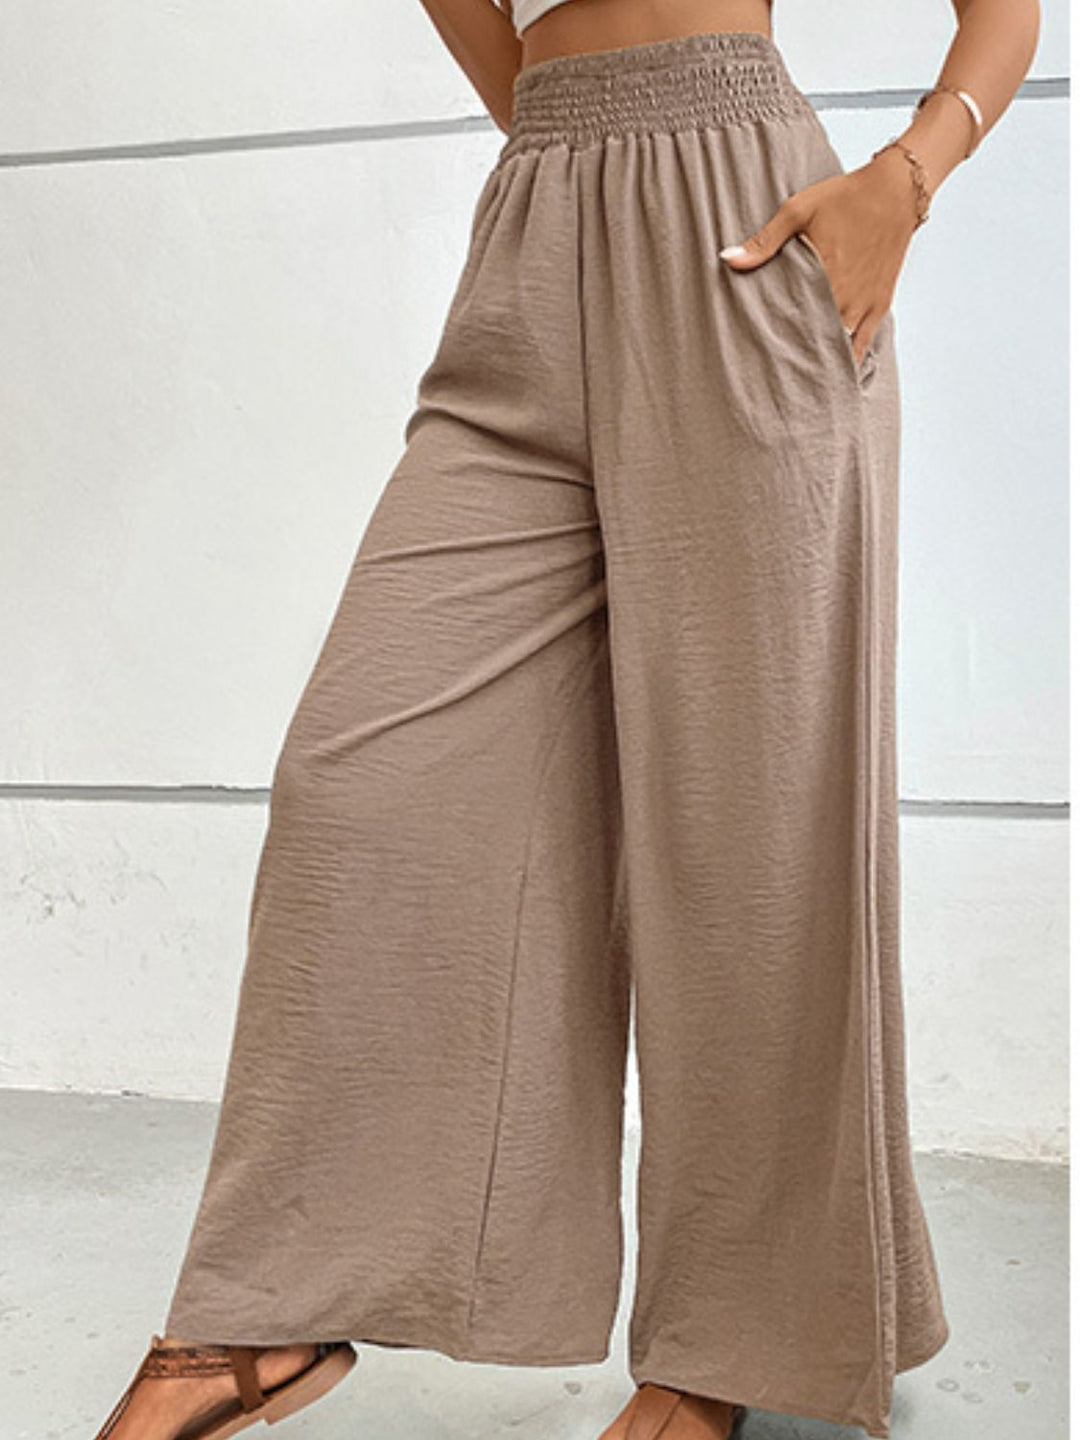 6 Colors - Wide Waistband Relax Fit Long Pants - Sizes S-XL Ti Amo I love you